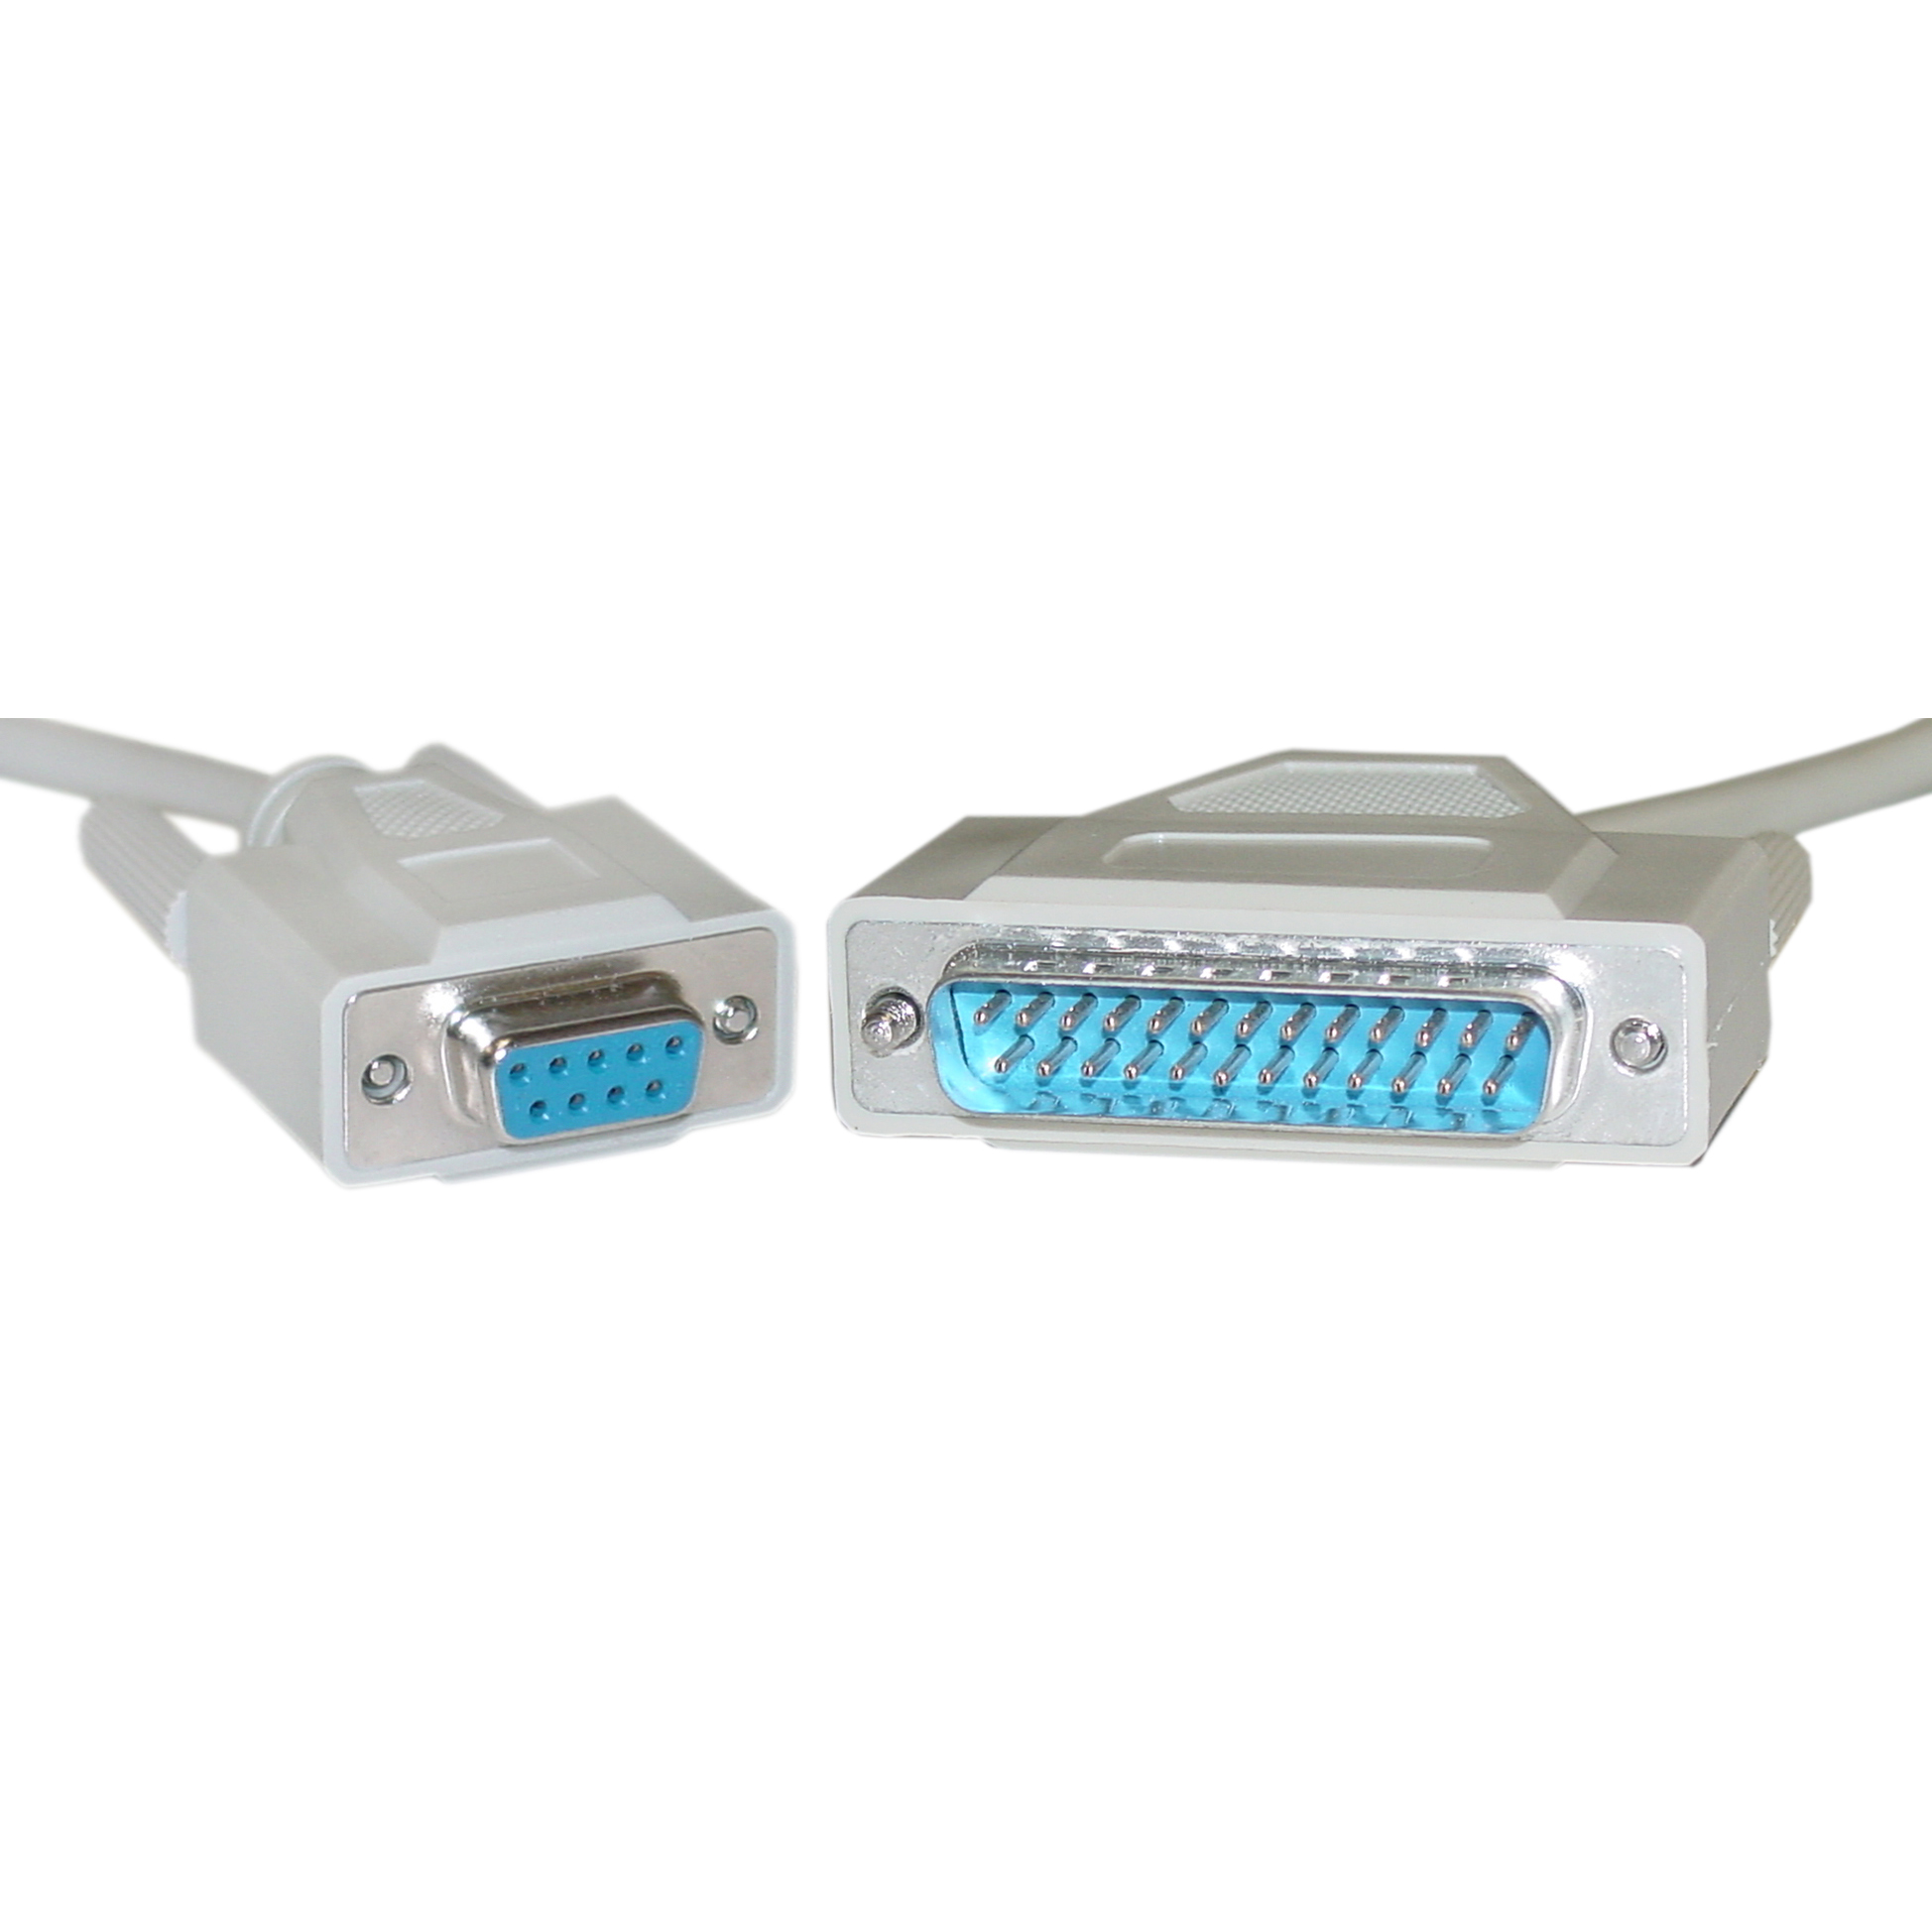 Null Modem Cable Db9 To Db25